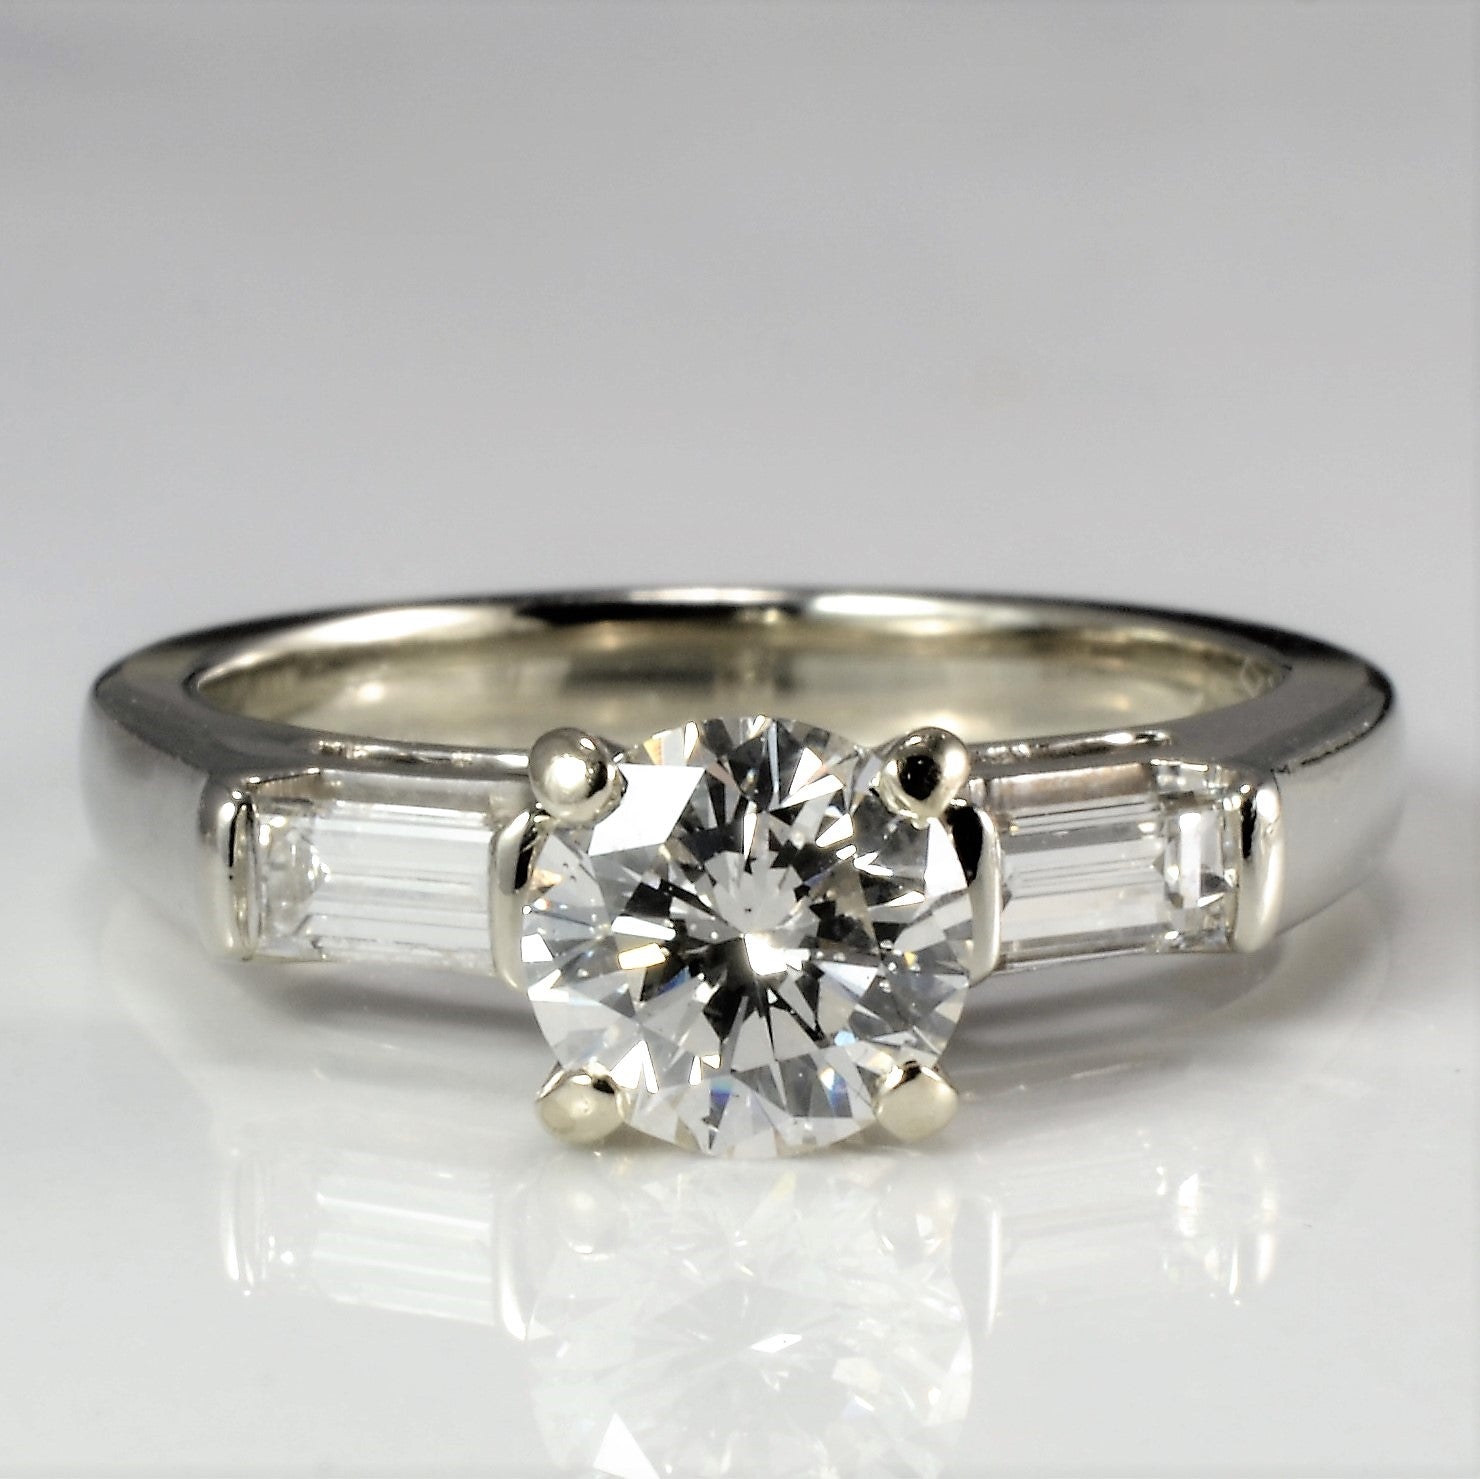 Baguette Accented GIA Diamond Engagement Ring | 1.24 ctw, SZ 5.75 |